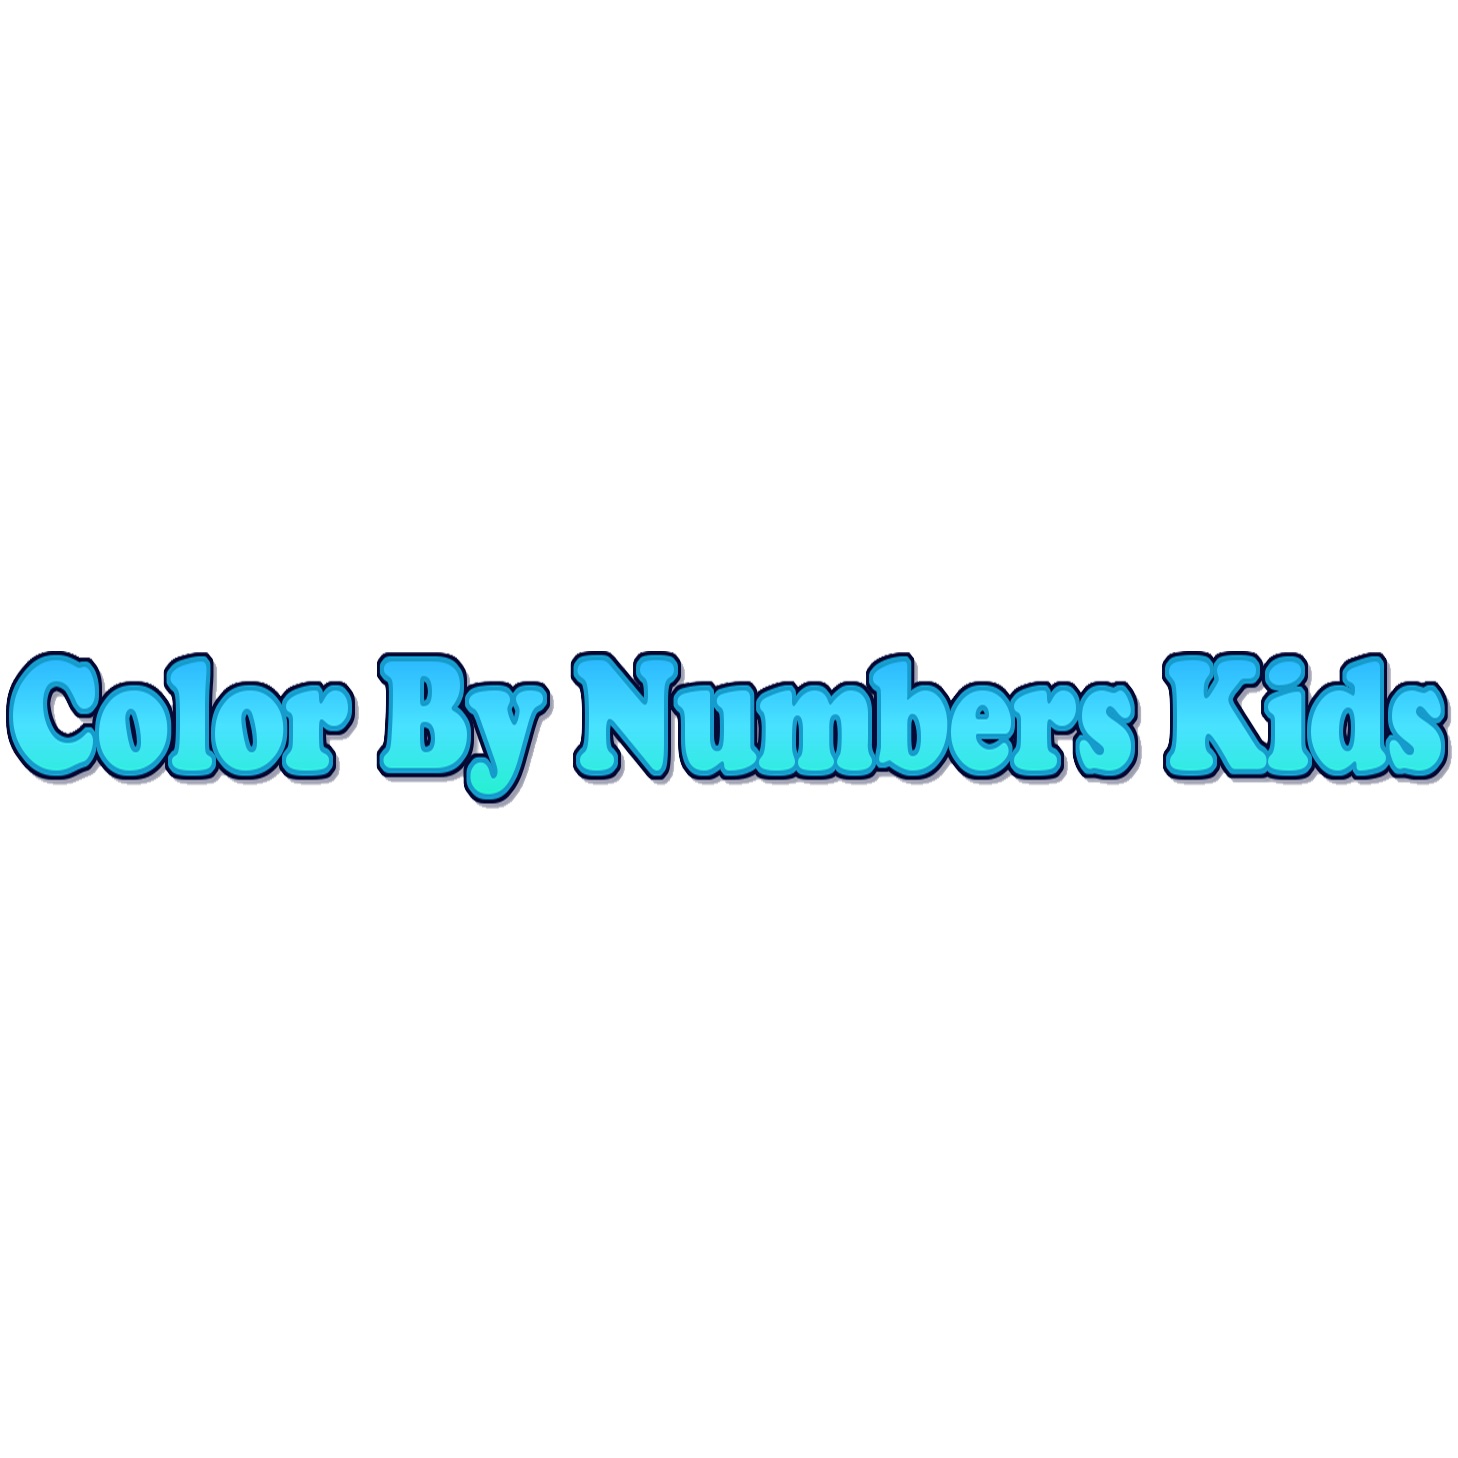 colorbynumberskids